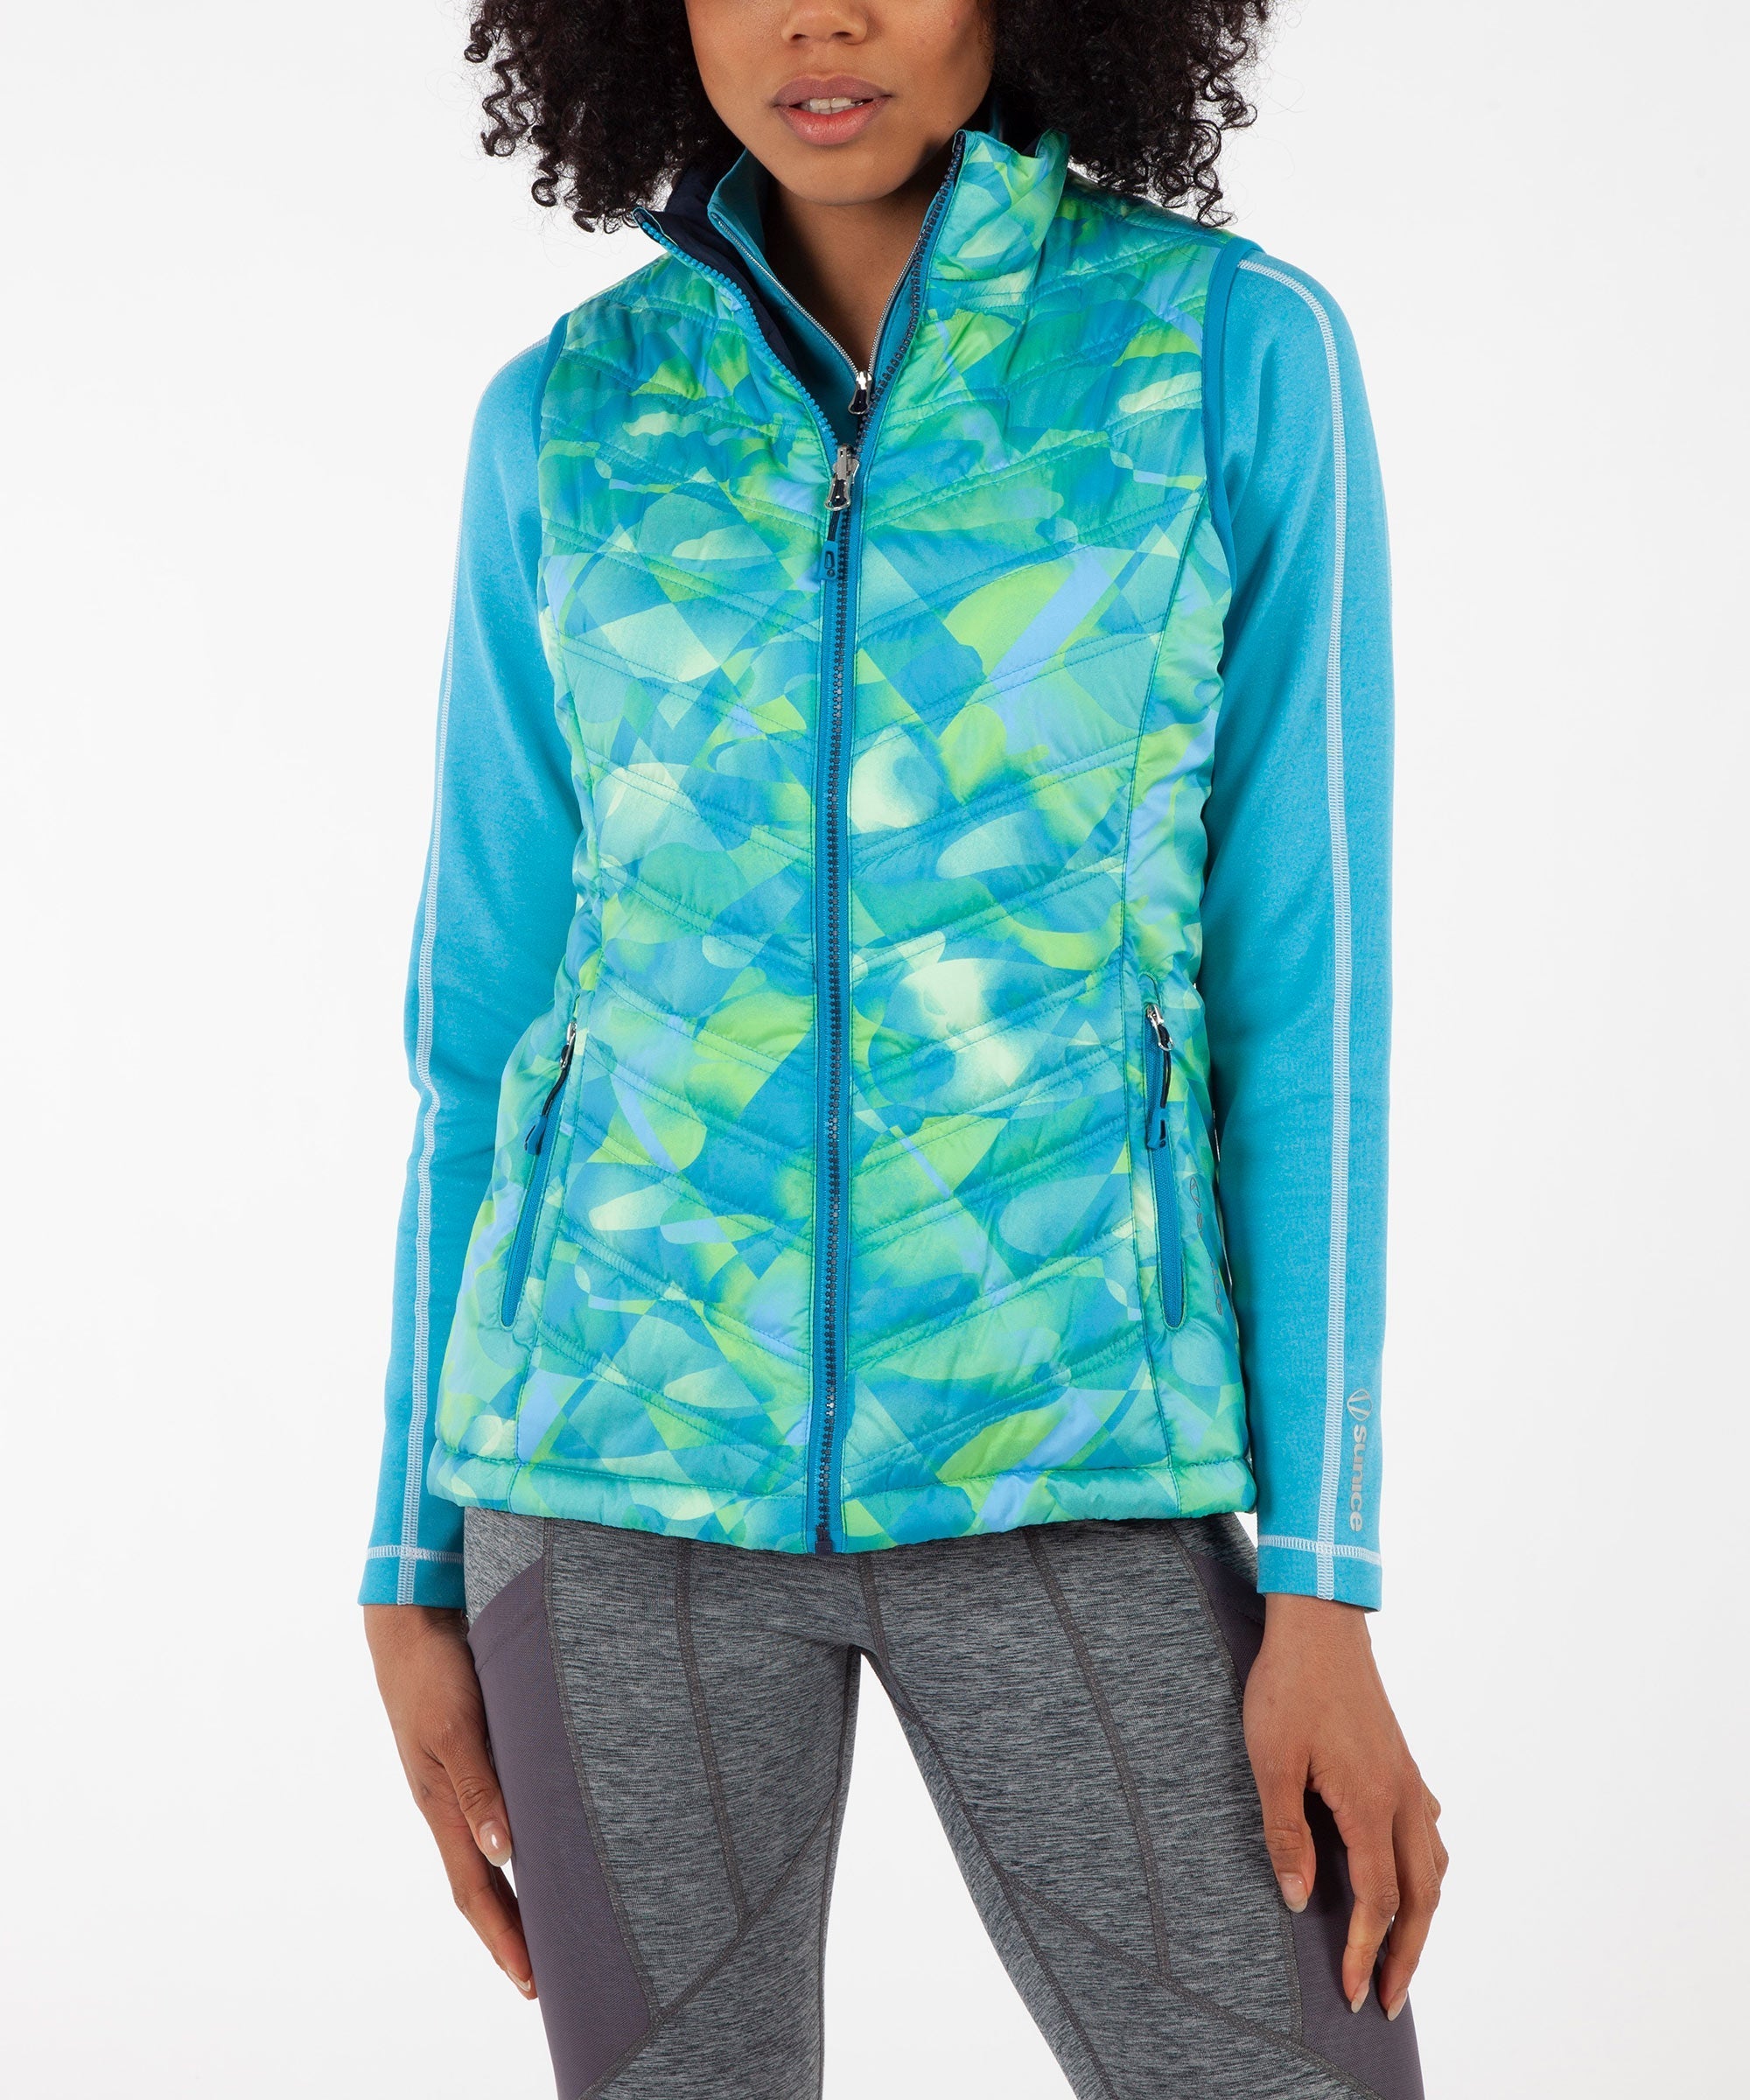 Sunice Women's Lizzie Quilted Thermal Vest - Worldwide Golf Shops